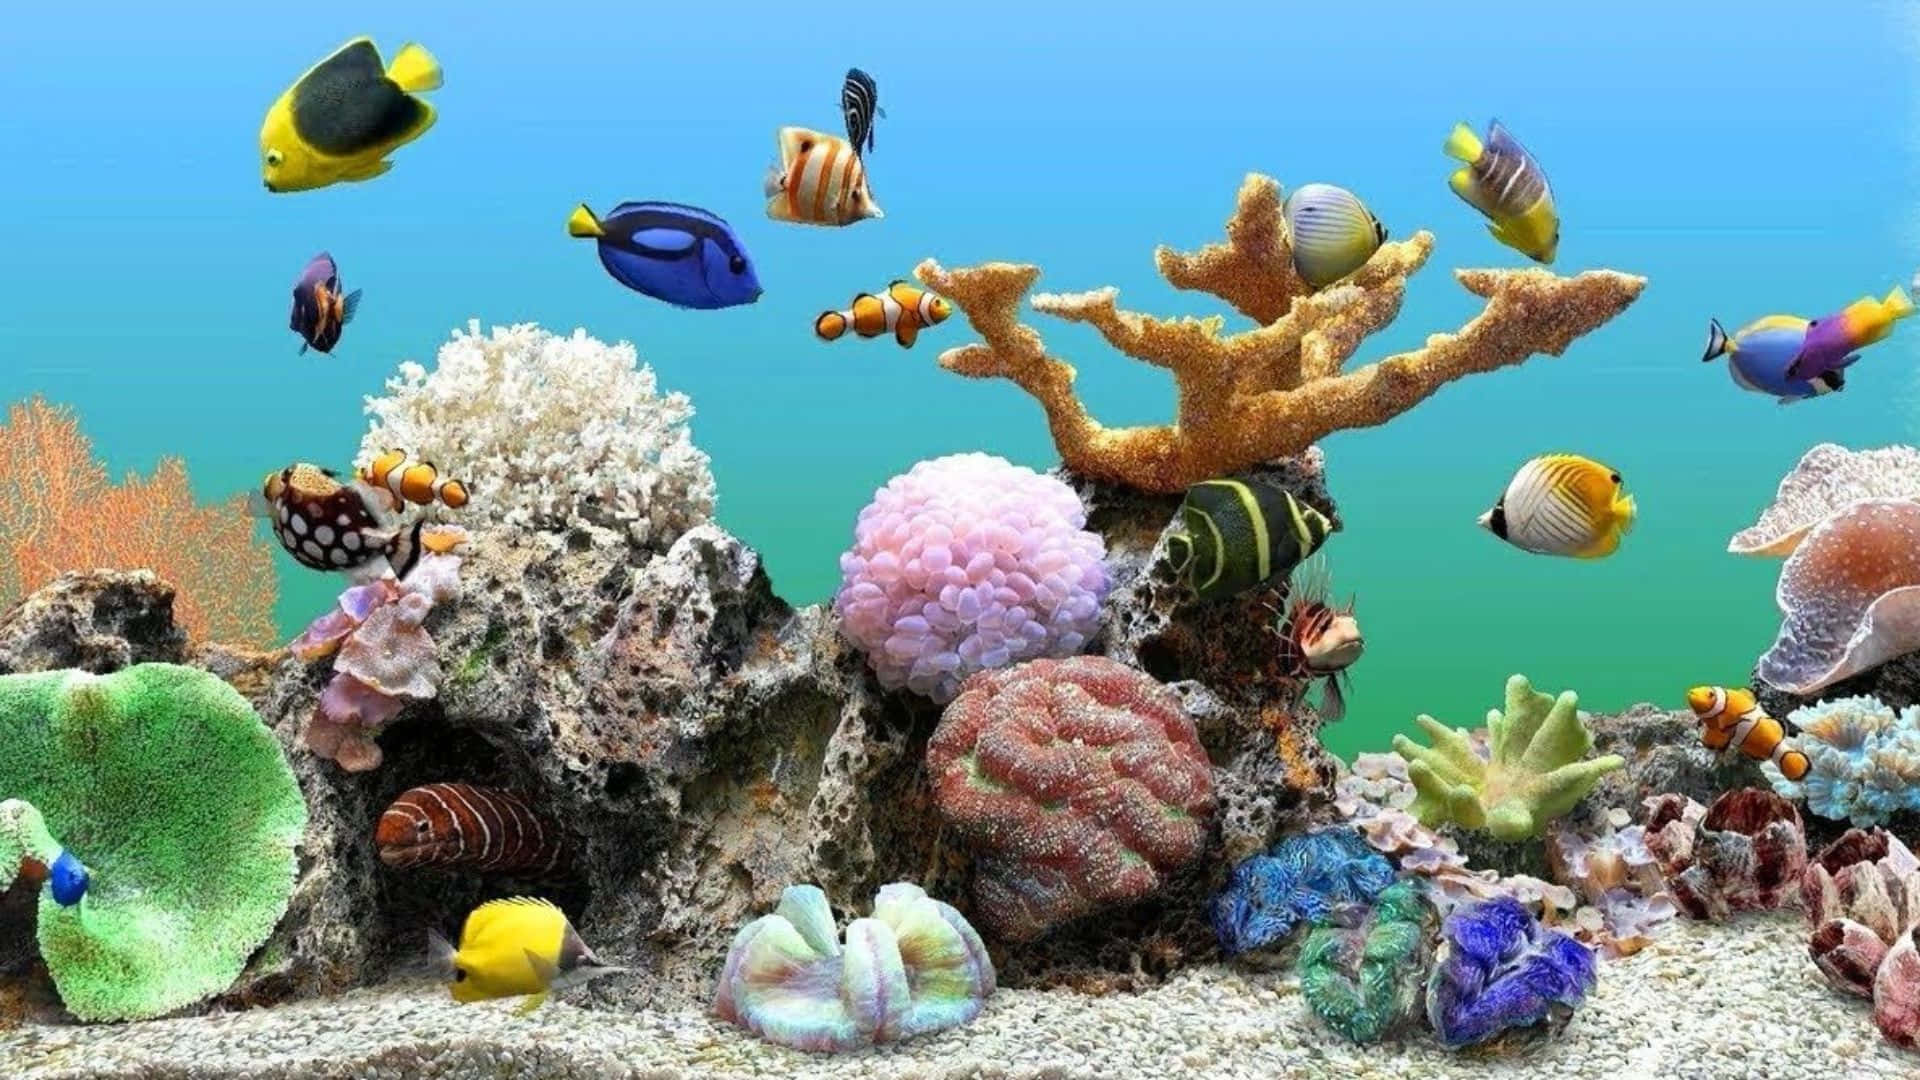 A Screenshot Of An Aquarium With Many Different Fish